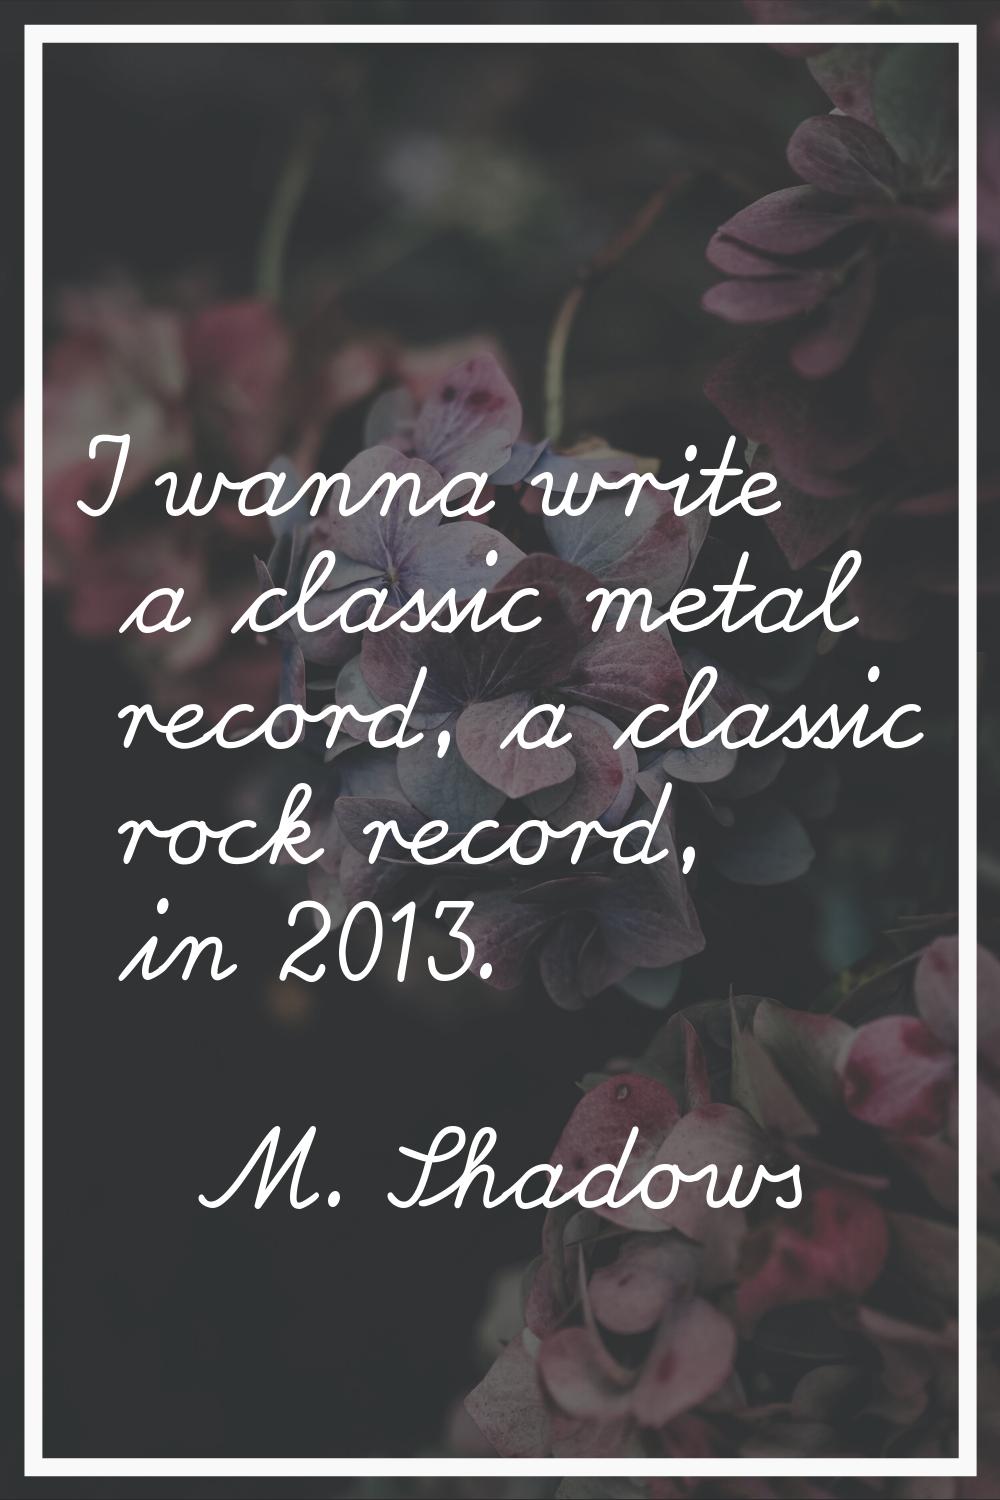 I wanna write a classic metal record, a classic rock record, in 2013.